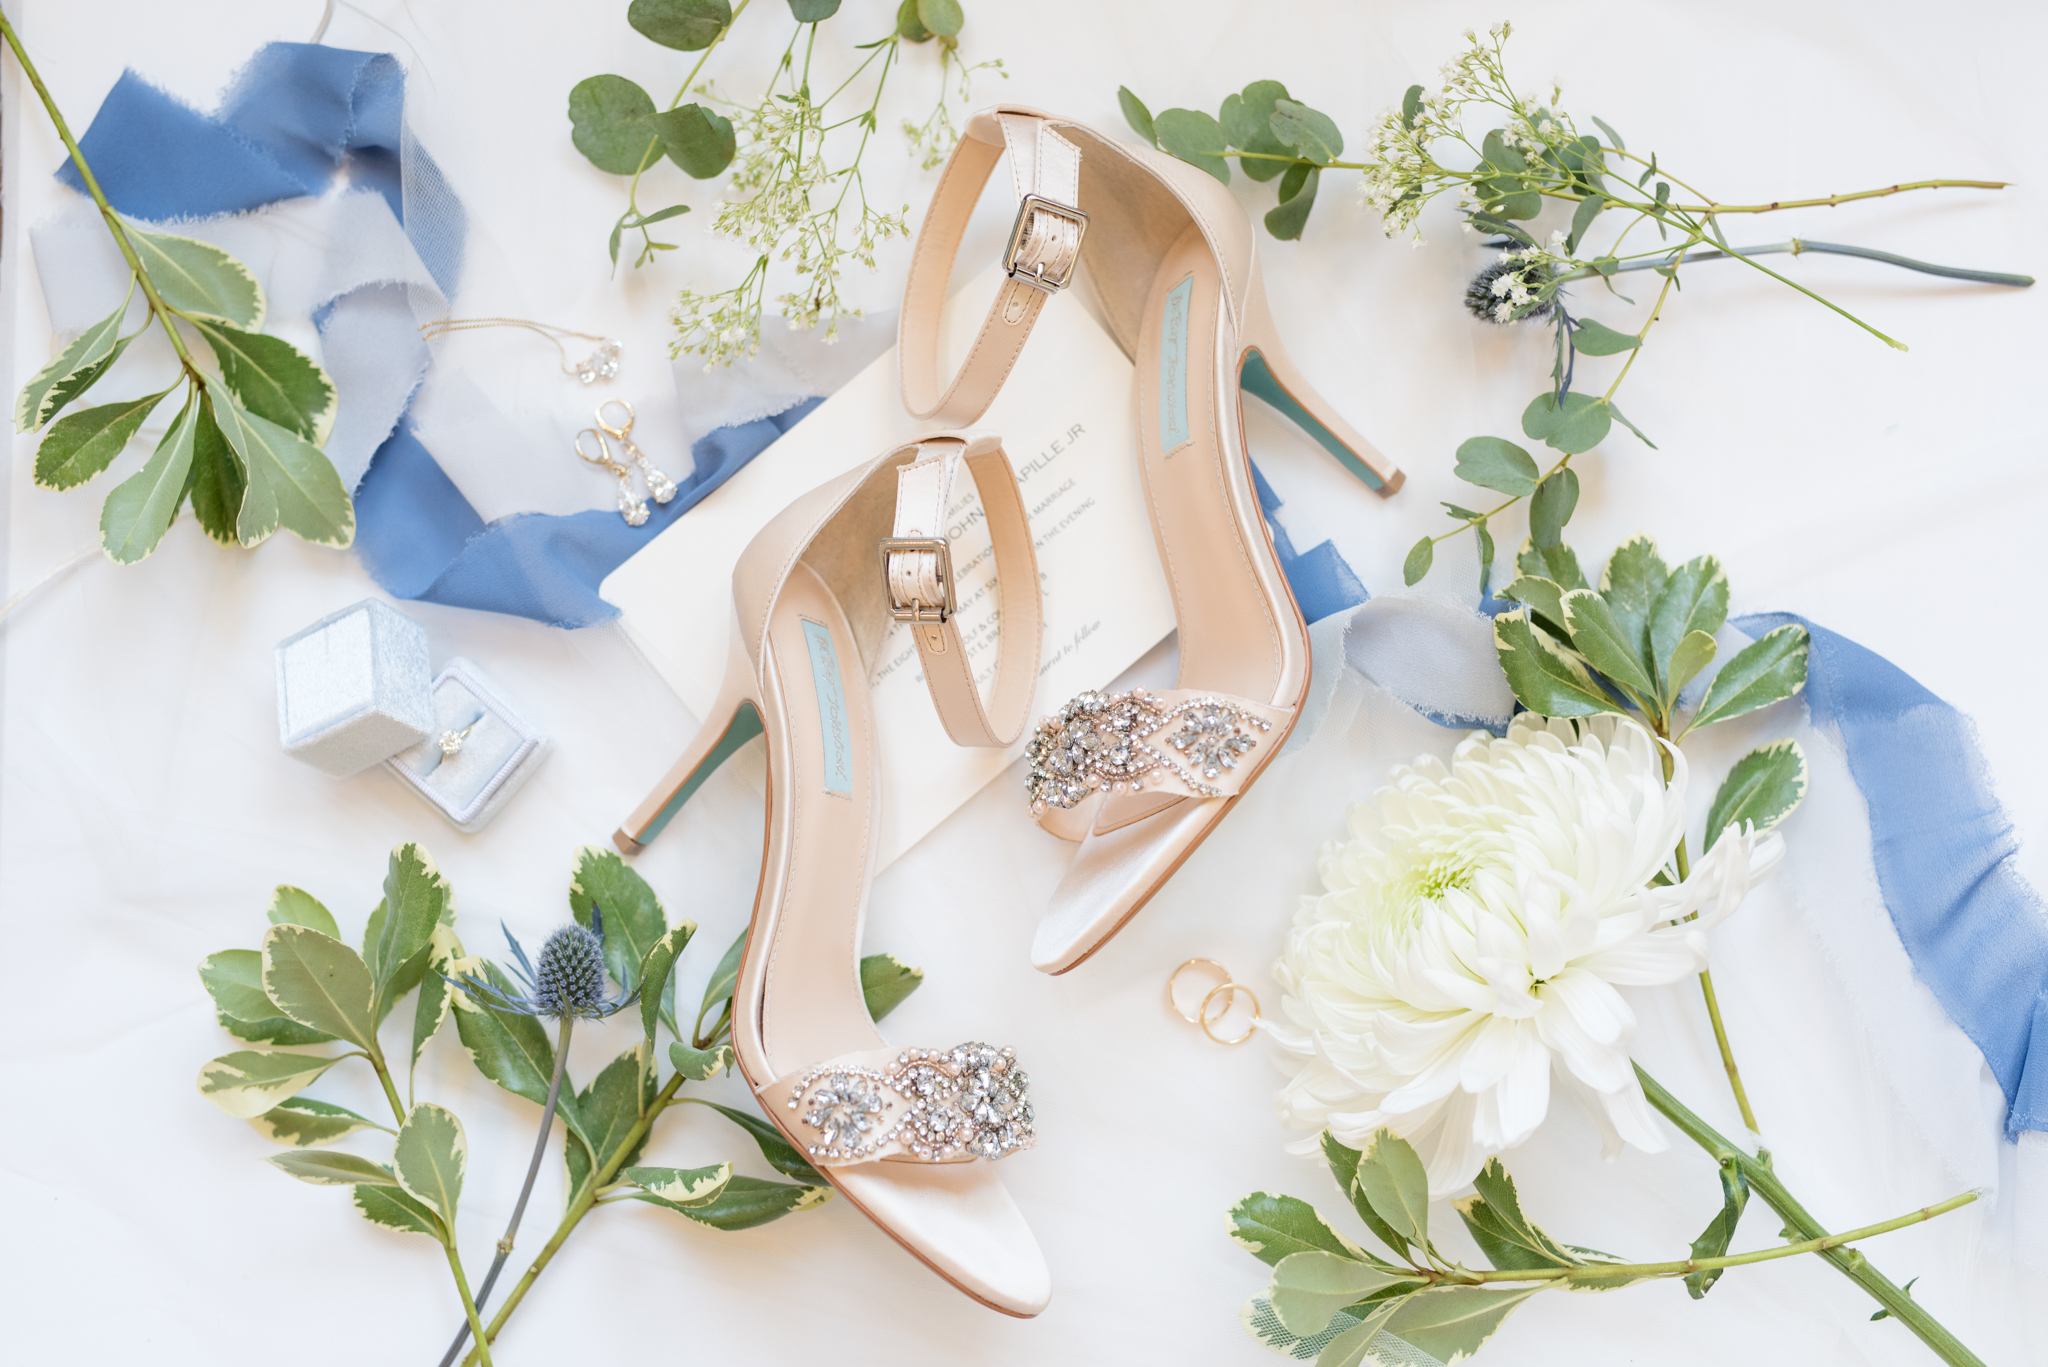 Bridal shoes sit with wedding details.